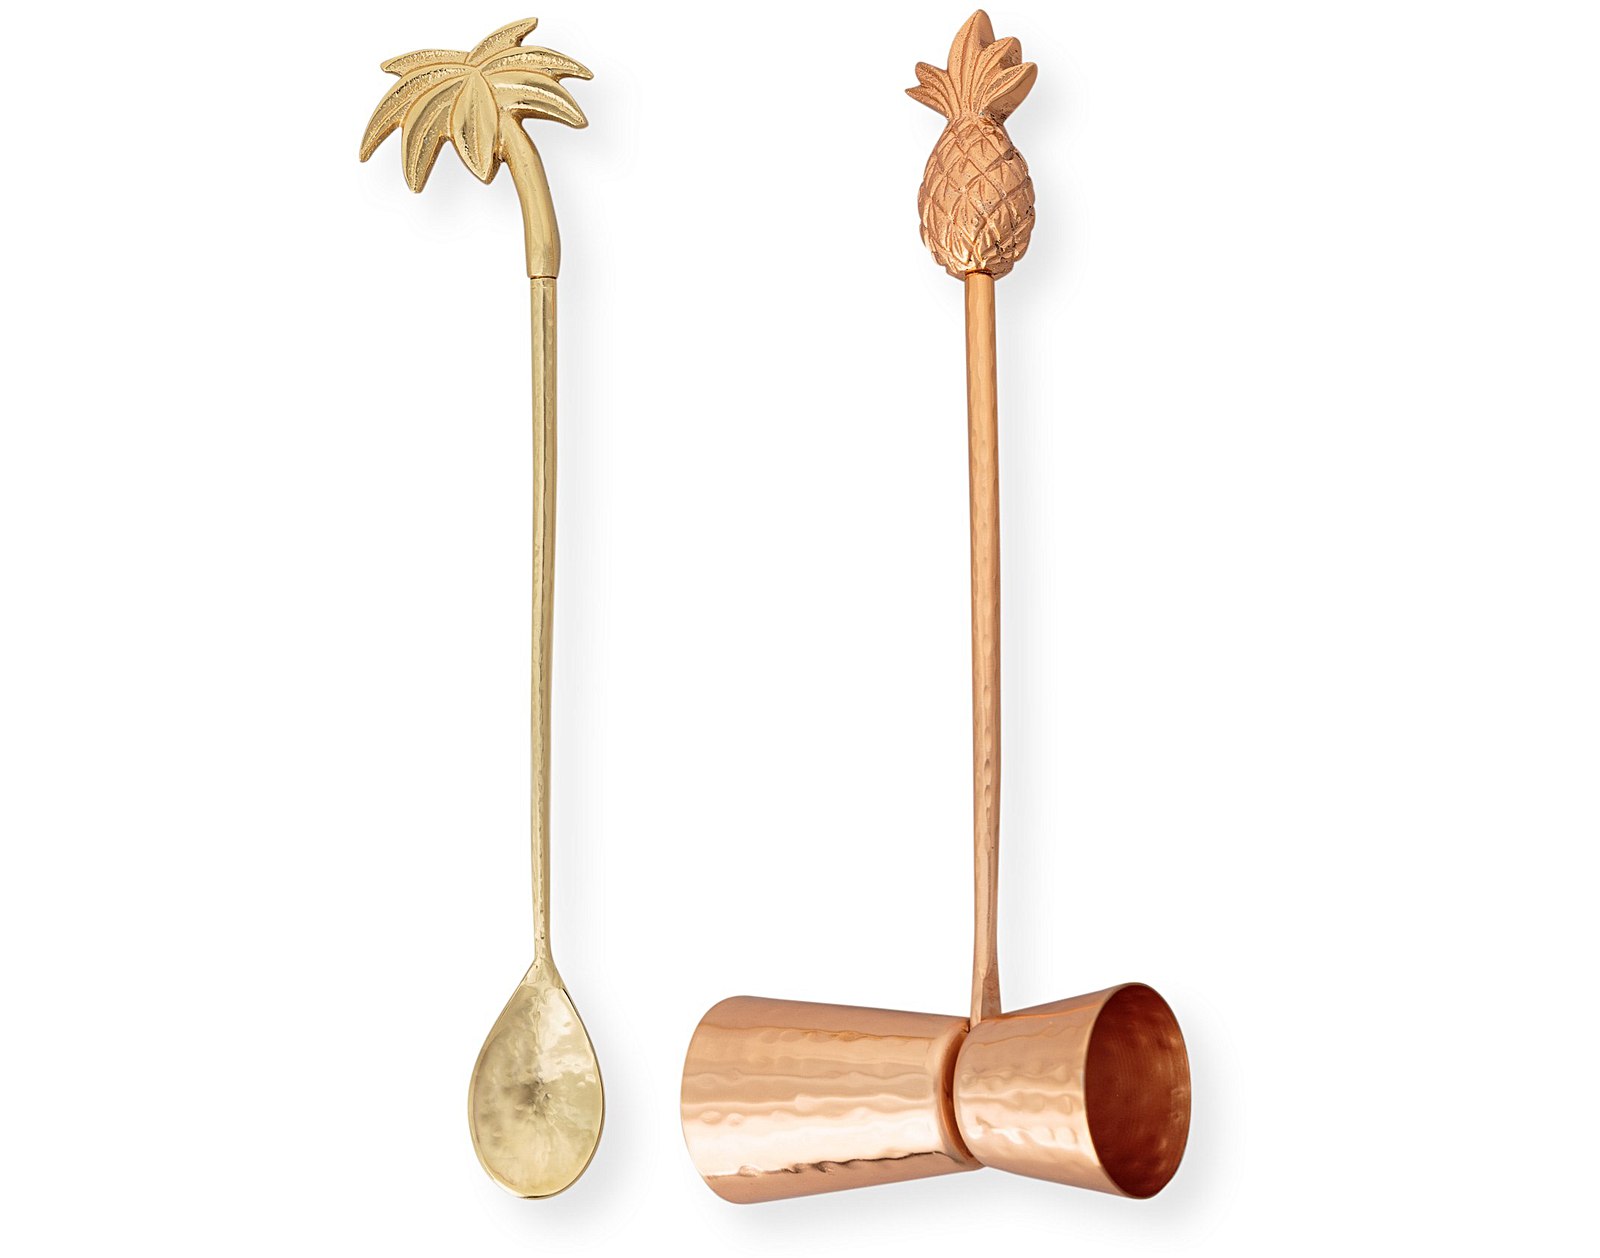 Oliver Bonas cocktail jigger and spoon £23